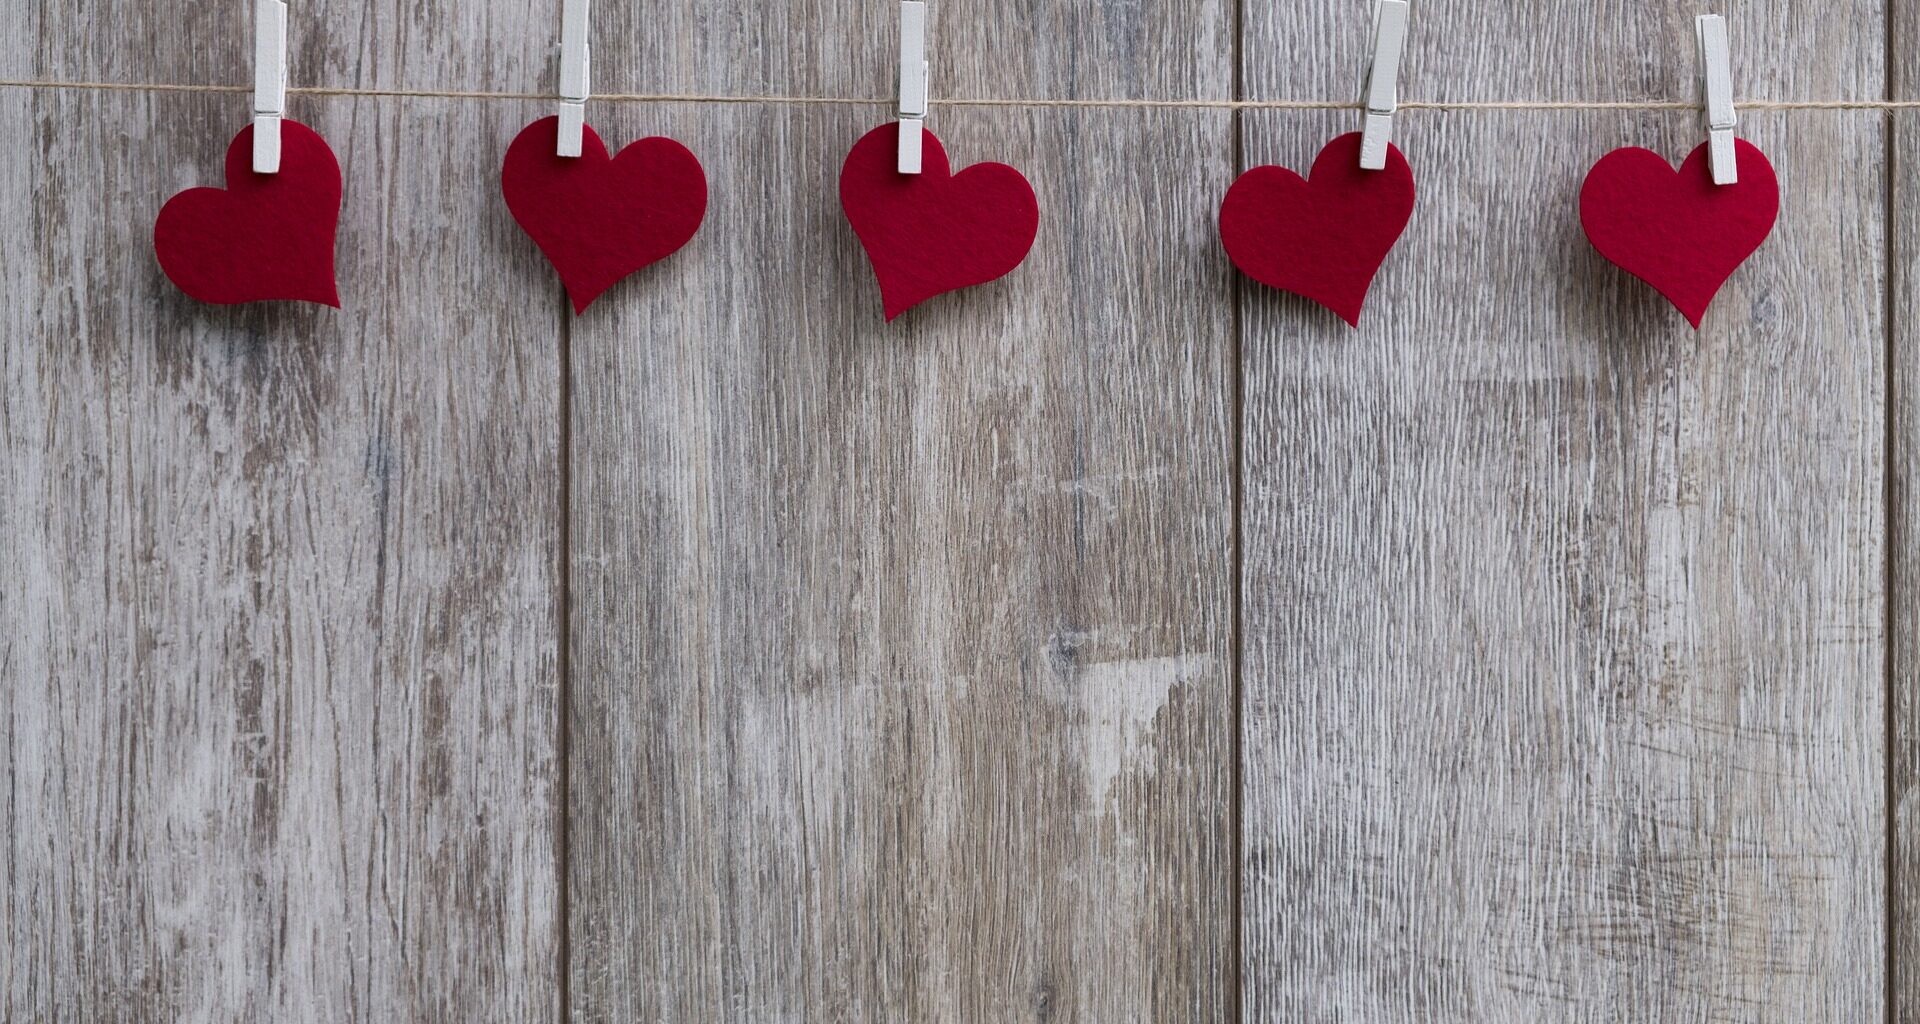 Paper hearts attached to a string by paperclips